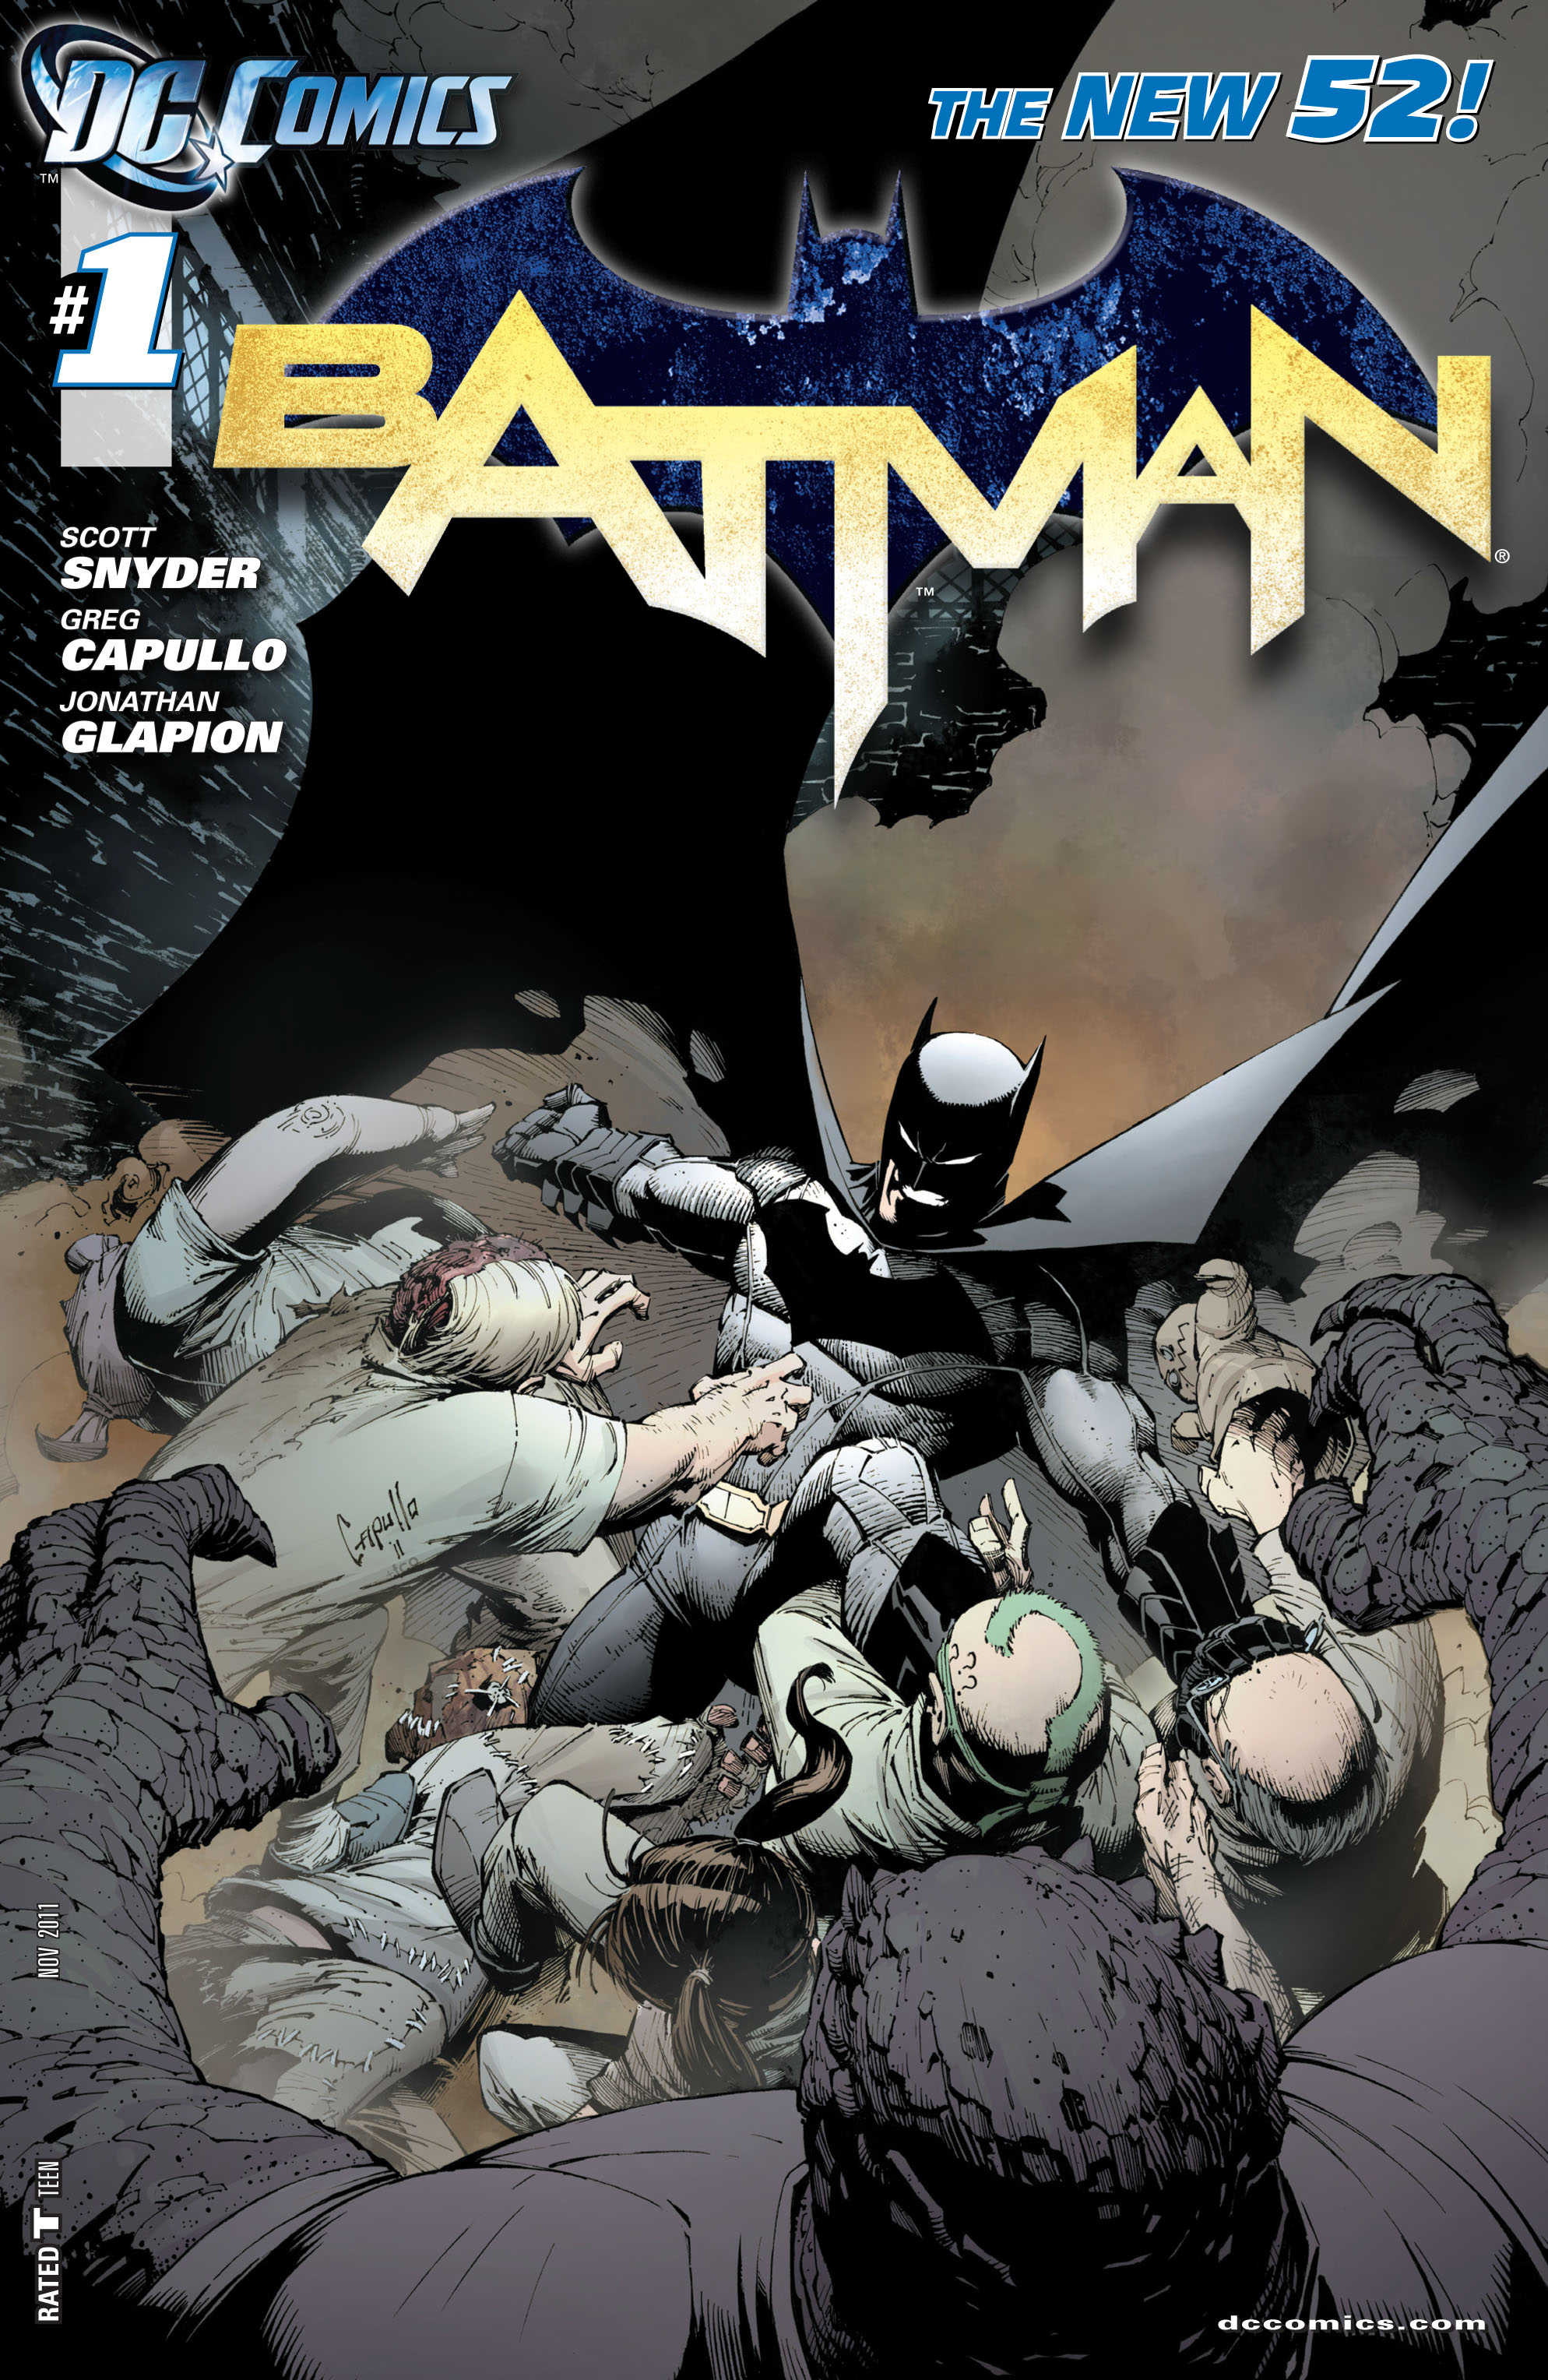 Batman 2011 Issue 1 | Read Batman 2011 Issue 1 comic online in high  quality. Read Full Comic online for free - Read comics online in high  quality .|